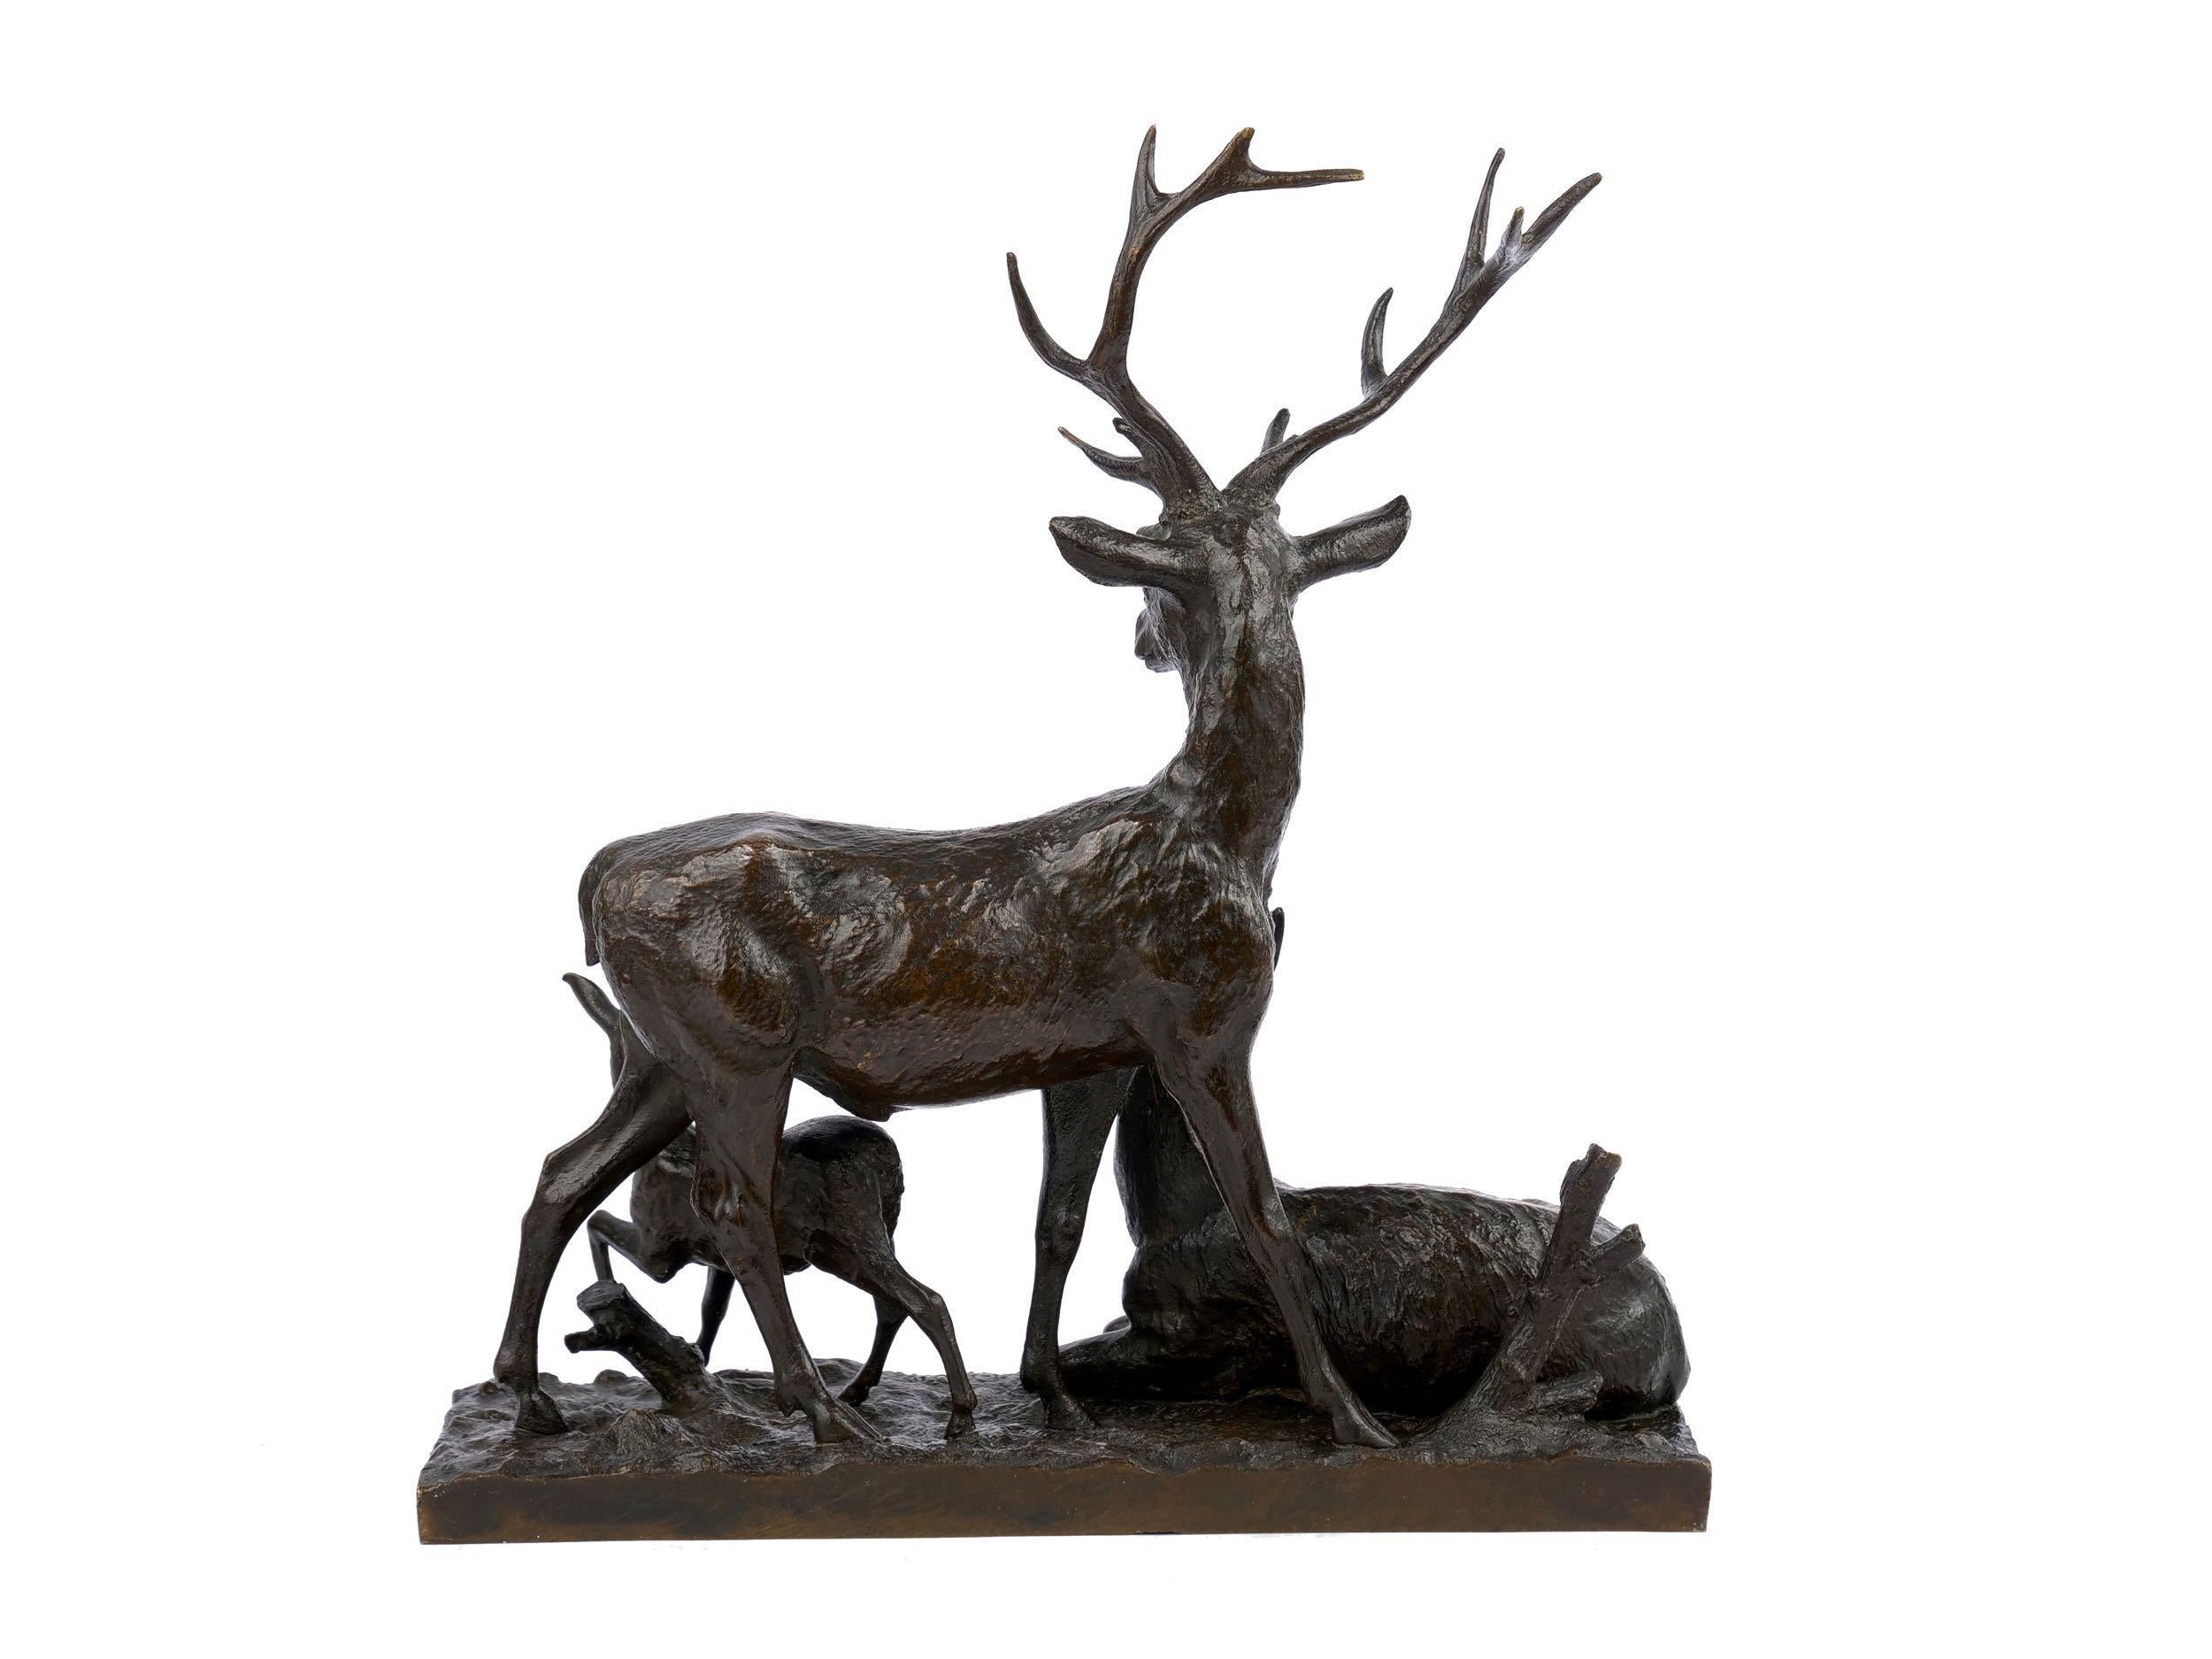 Bronze Sculpture Group “Family of Deer” by Christophe Fratin & Debraux Foundry 1